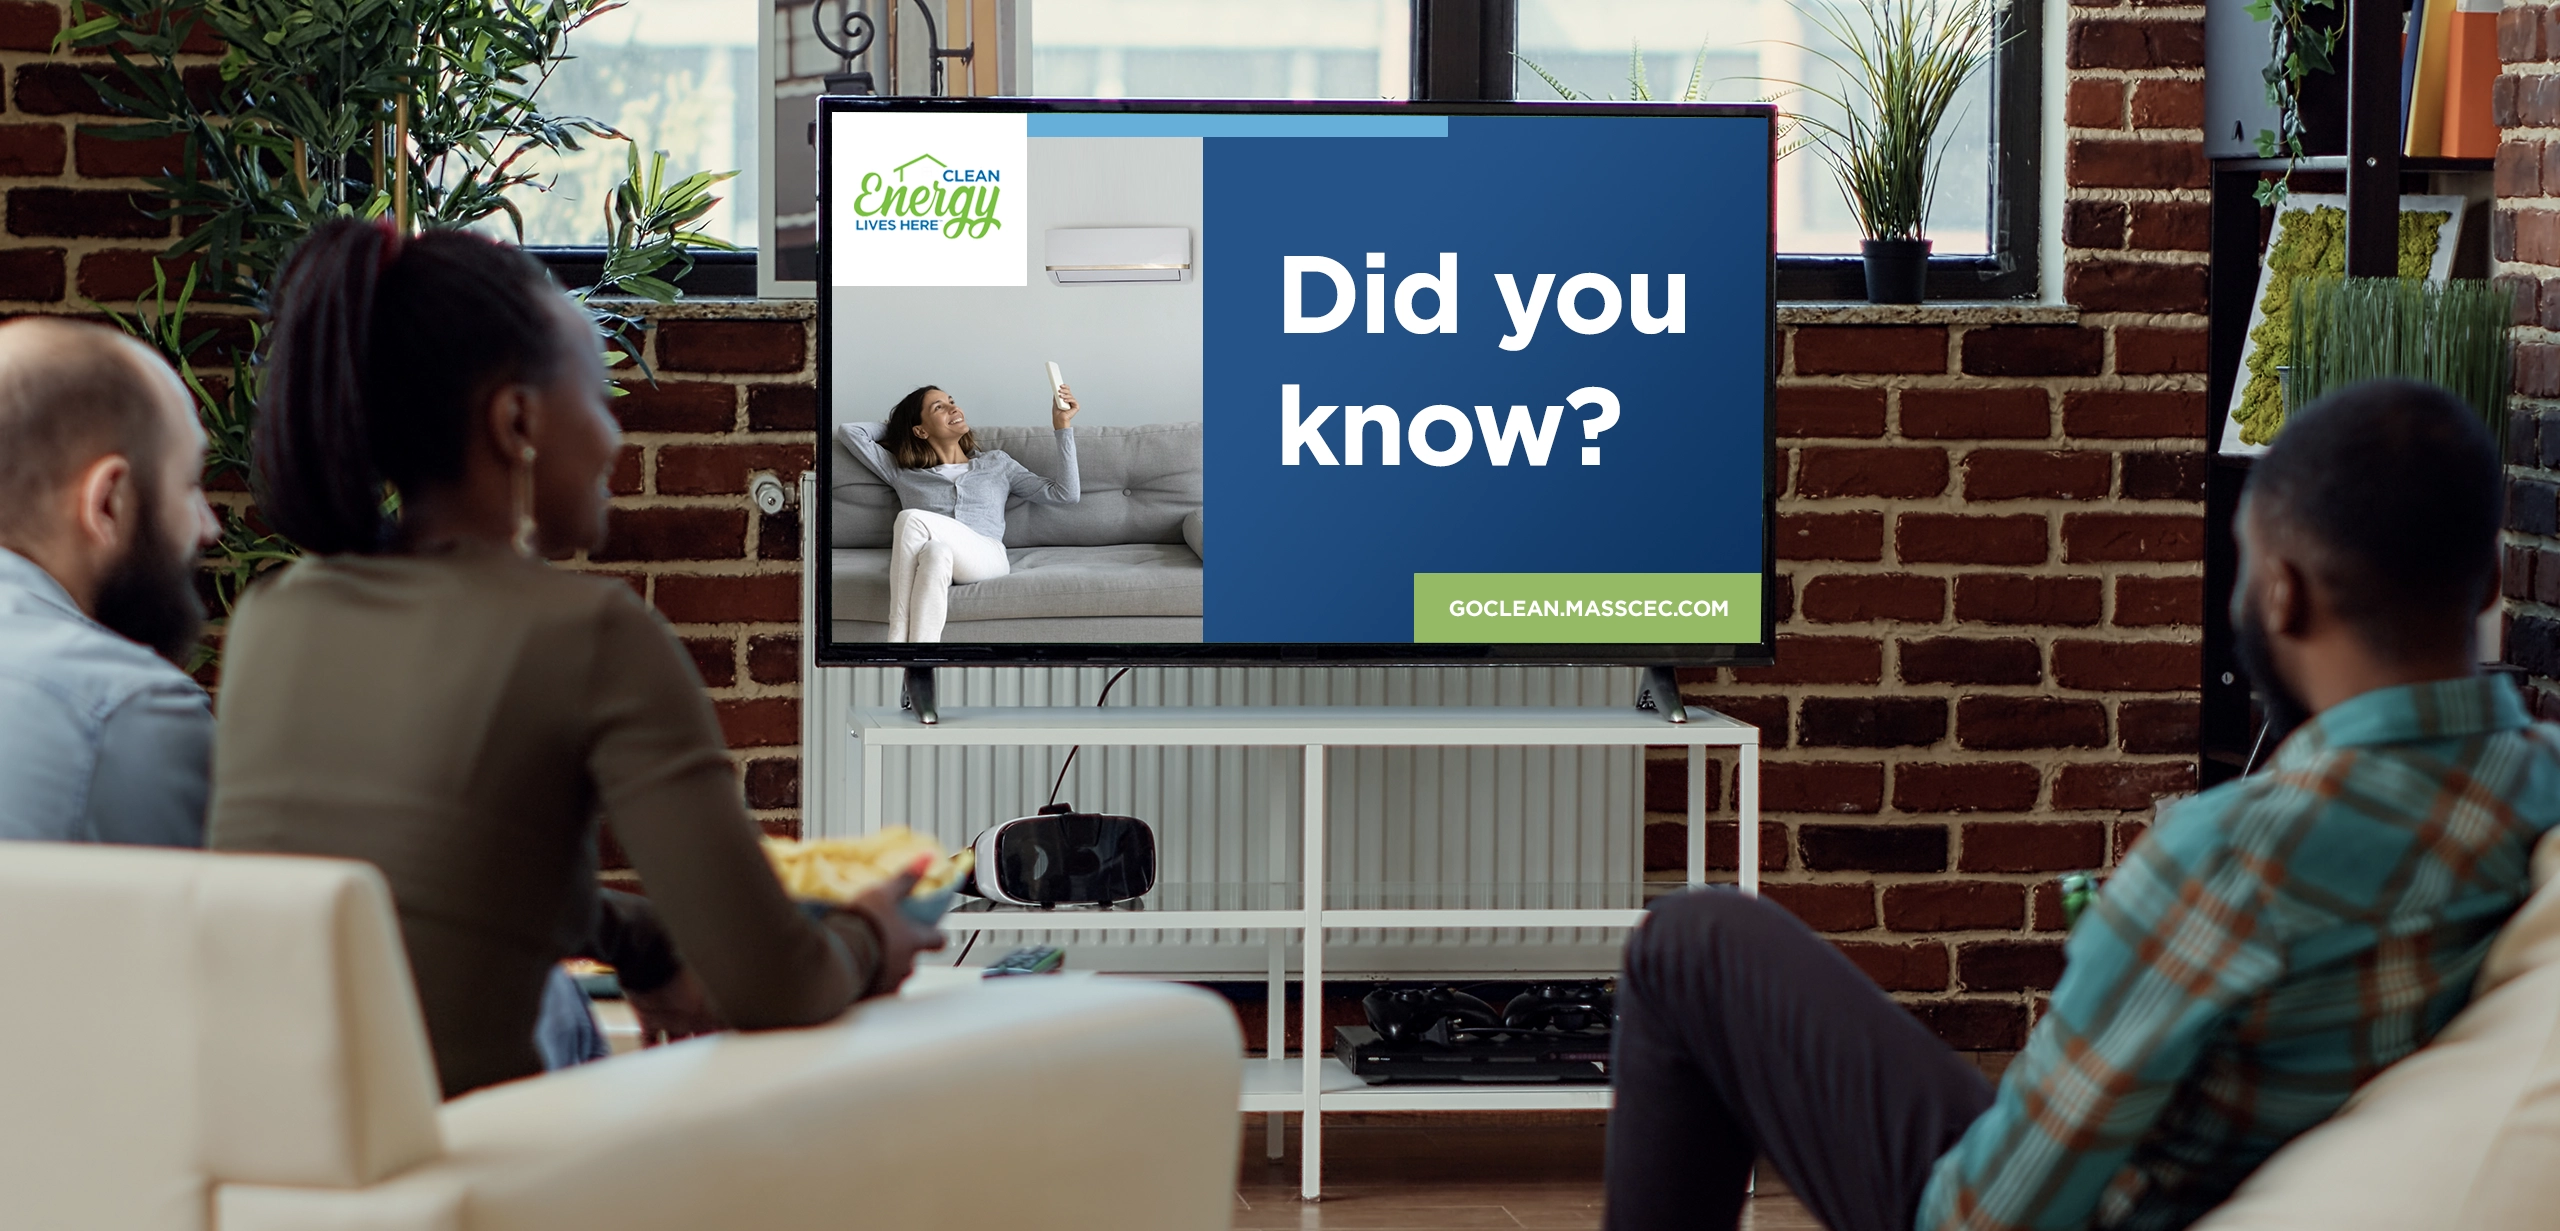 Clean energy company television advertising